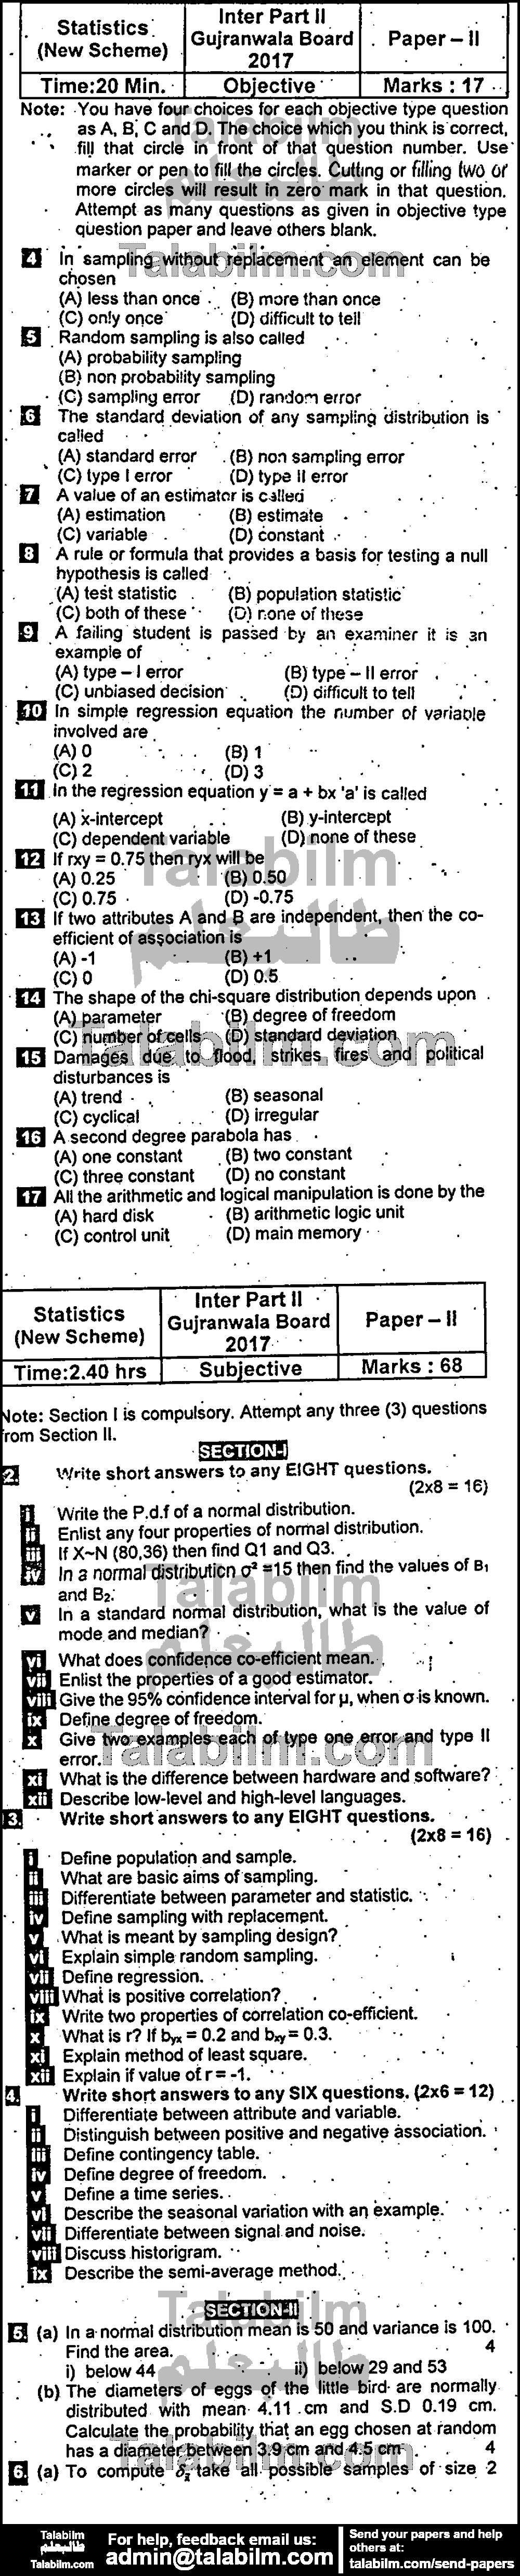 Statistics 0 past paper for Group-II 2017